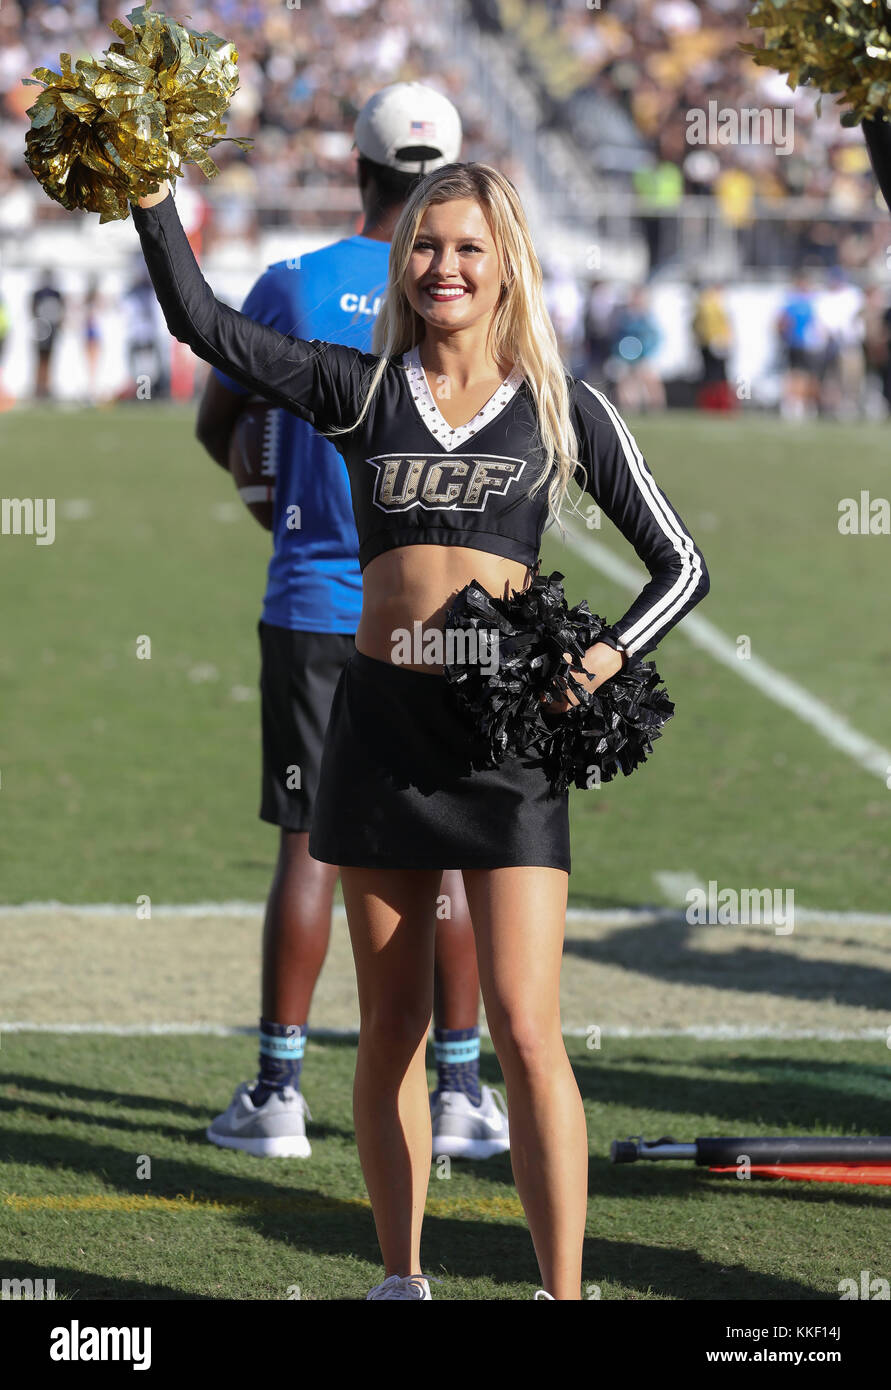 Orlando, FL, USA. 2nd Dec, 2017. A UCF dancer on the sidelines during the AAC Championship football game between the UCF Knights and the Memphis Tigers at the Spectrum Stadium in Orlando, FL. Kyle Okita/CSM/Alamy Live News Stock Photo